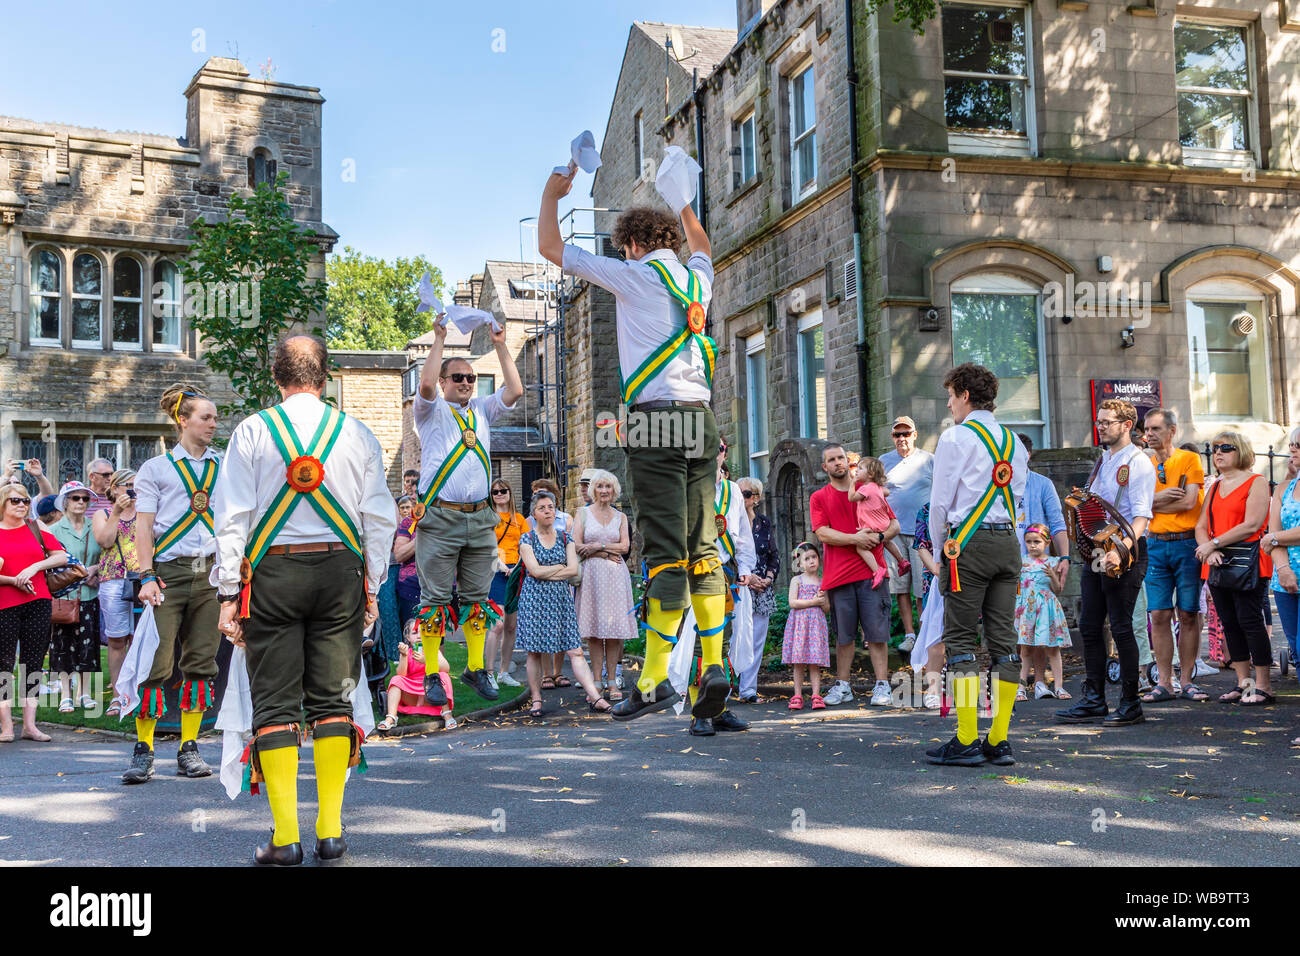 Morris dancing at the Saddleworth Rushcart Festival in the village of Uppermill, England. Stock Photo